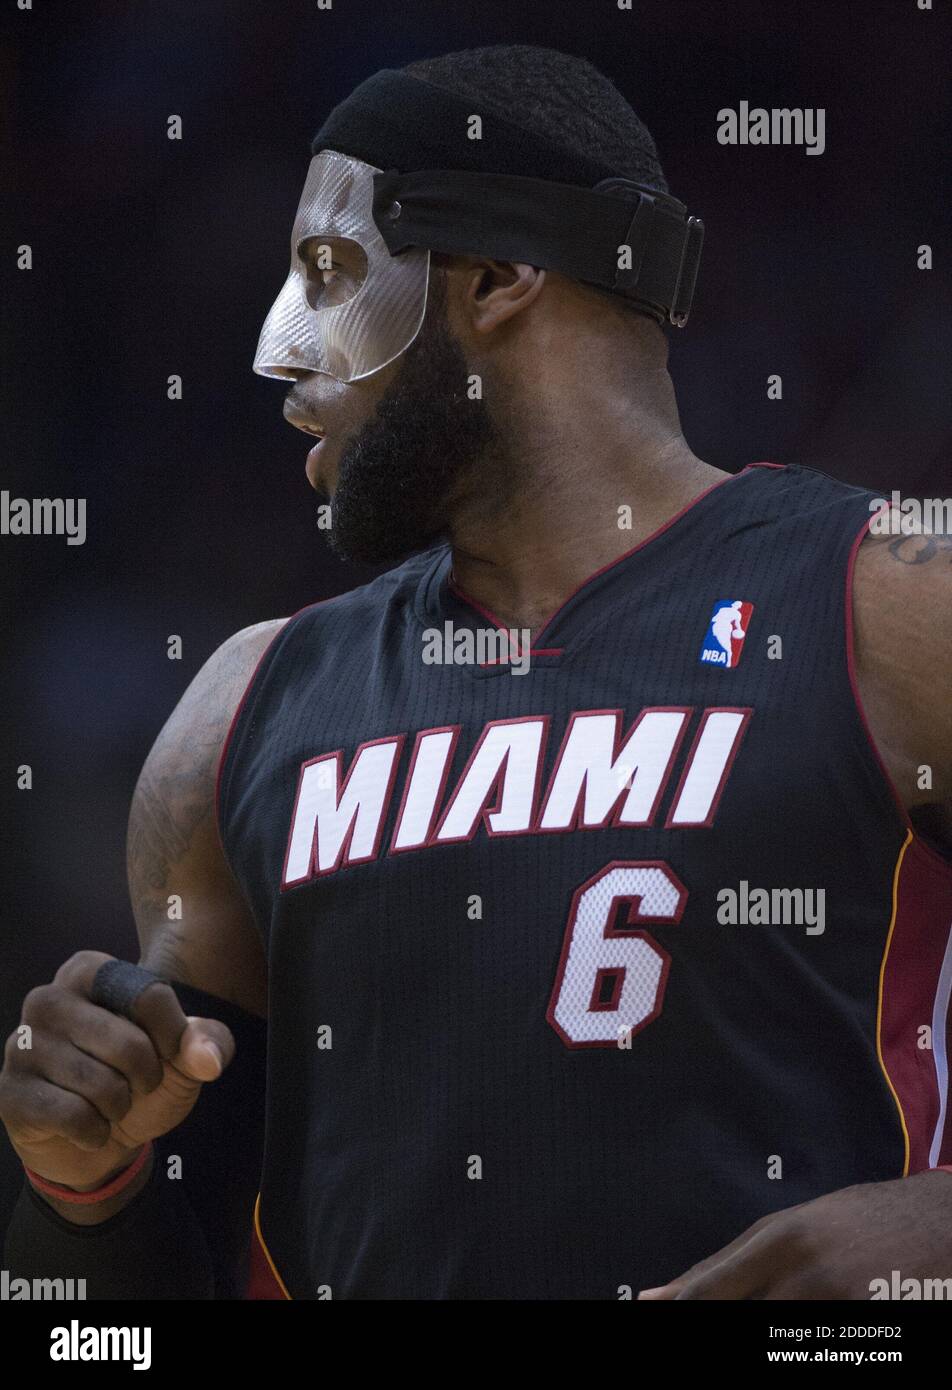 NO FILM, NO VIDEO, NO TV, NO DOCUMENTARY - LeBron James (6) of the Miami  Heat wears a protective face mask as his team faces the Houston Rockets in  the first half